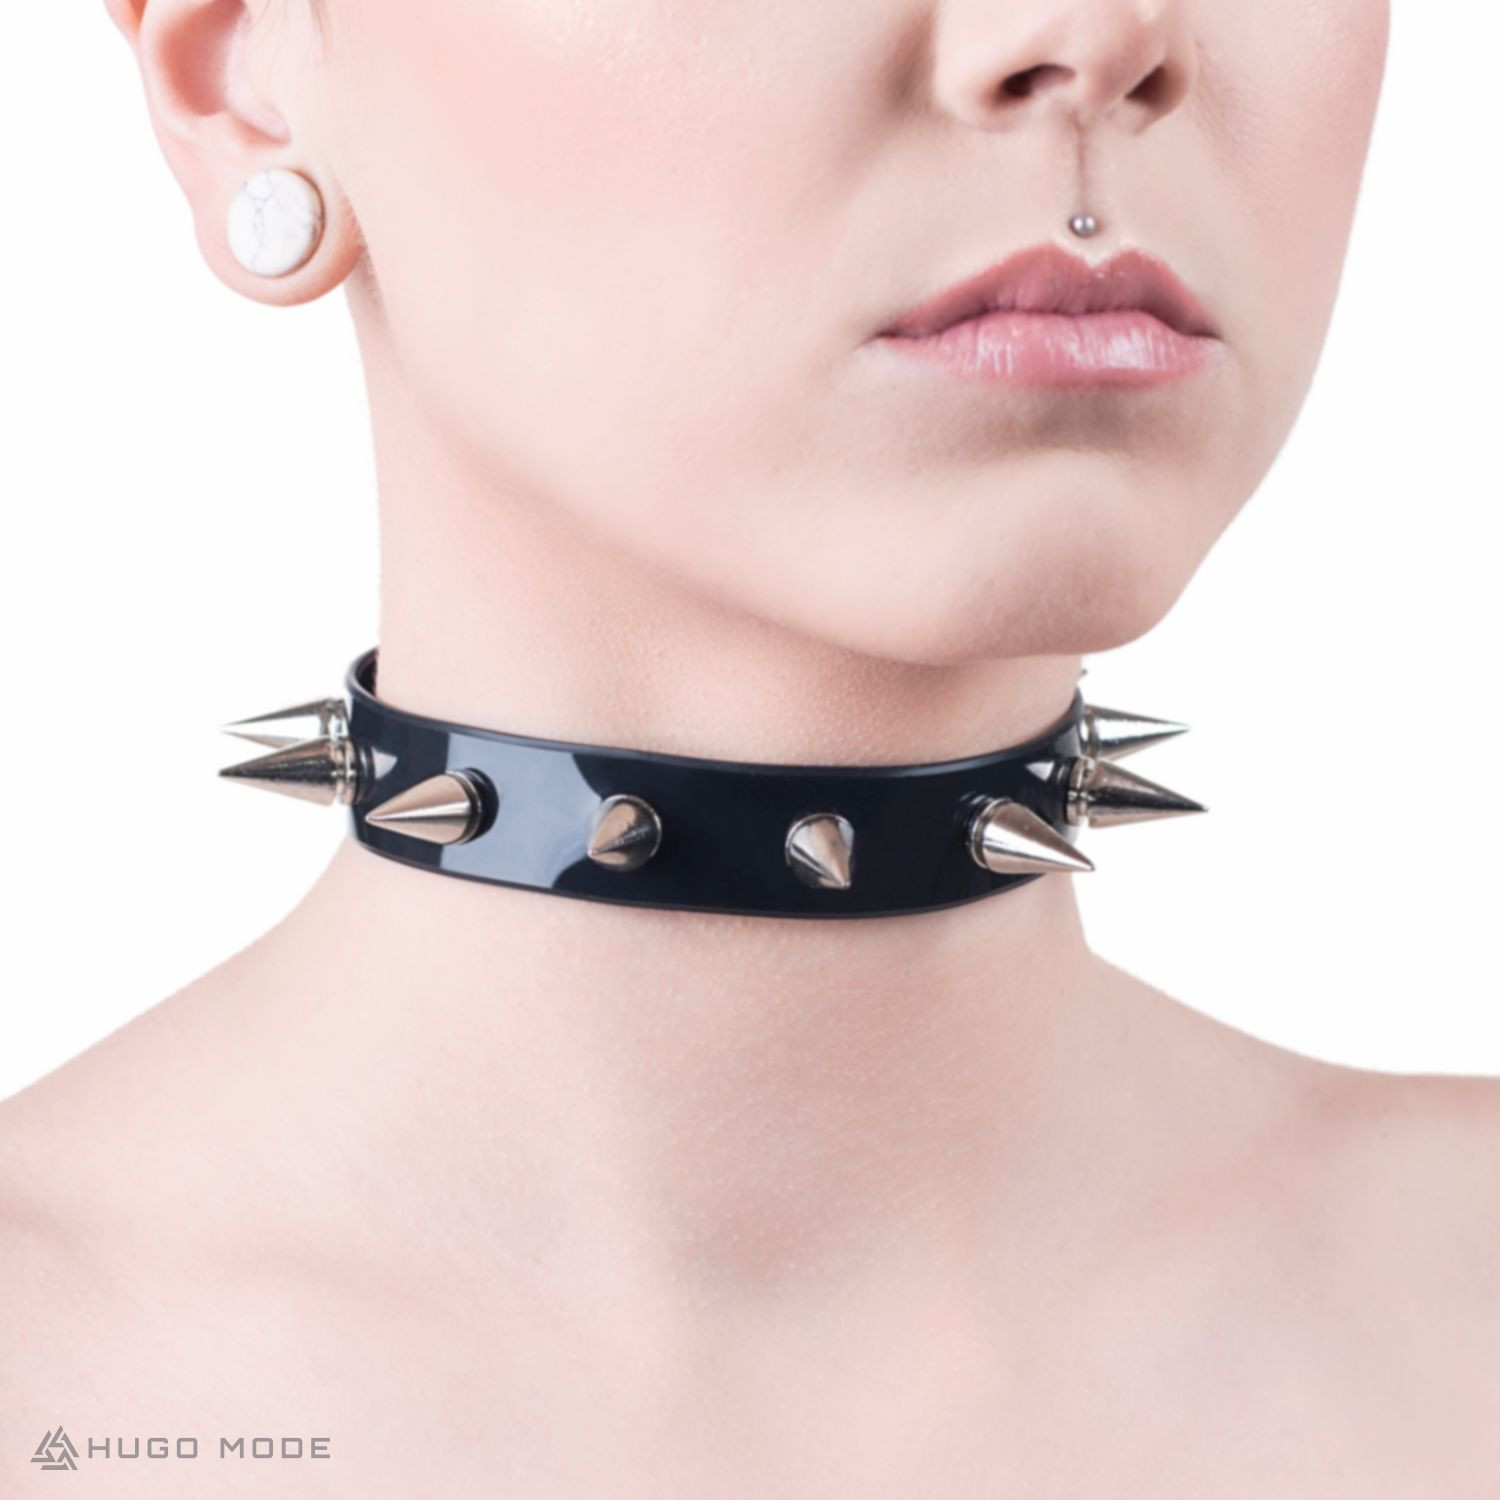 A choker necklace with small metal spikes.